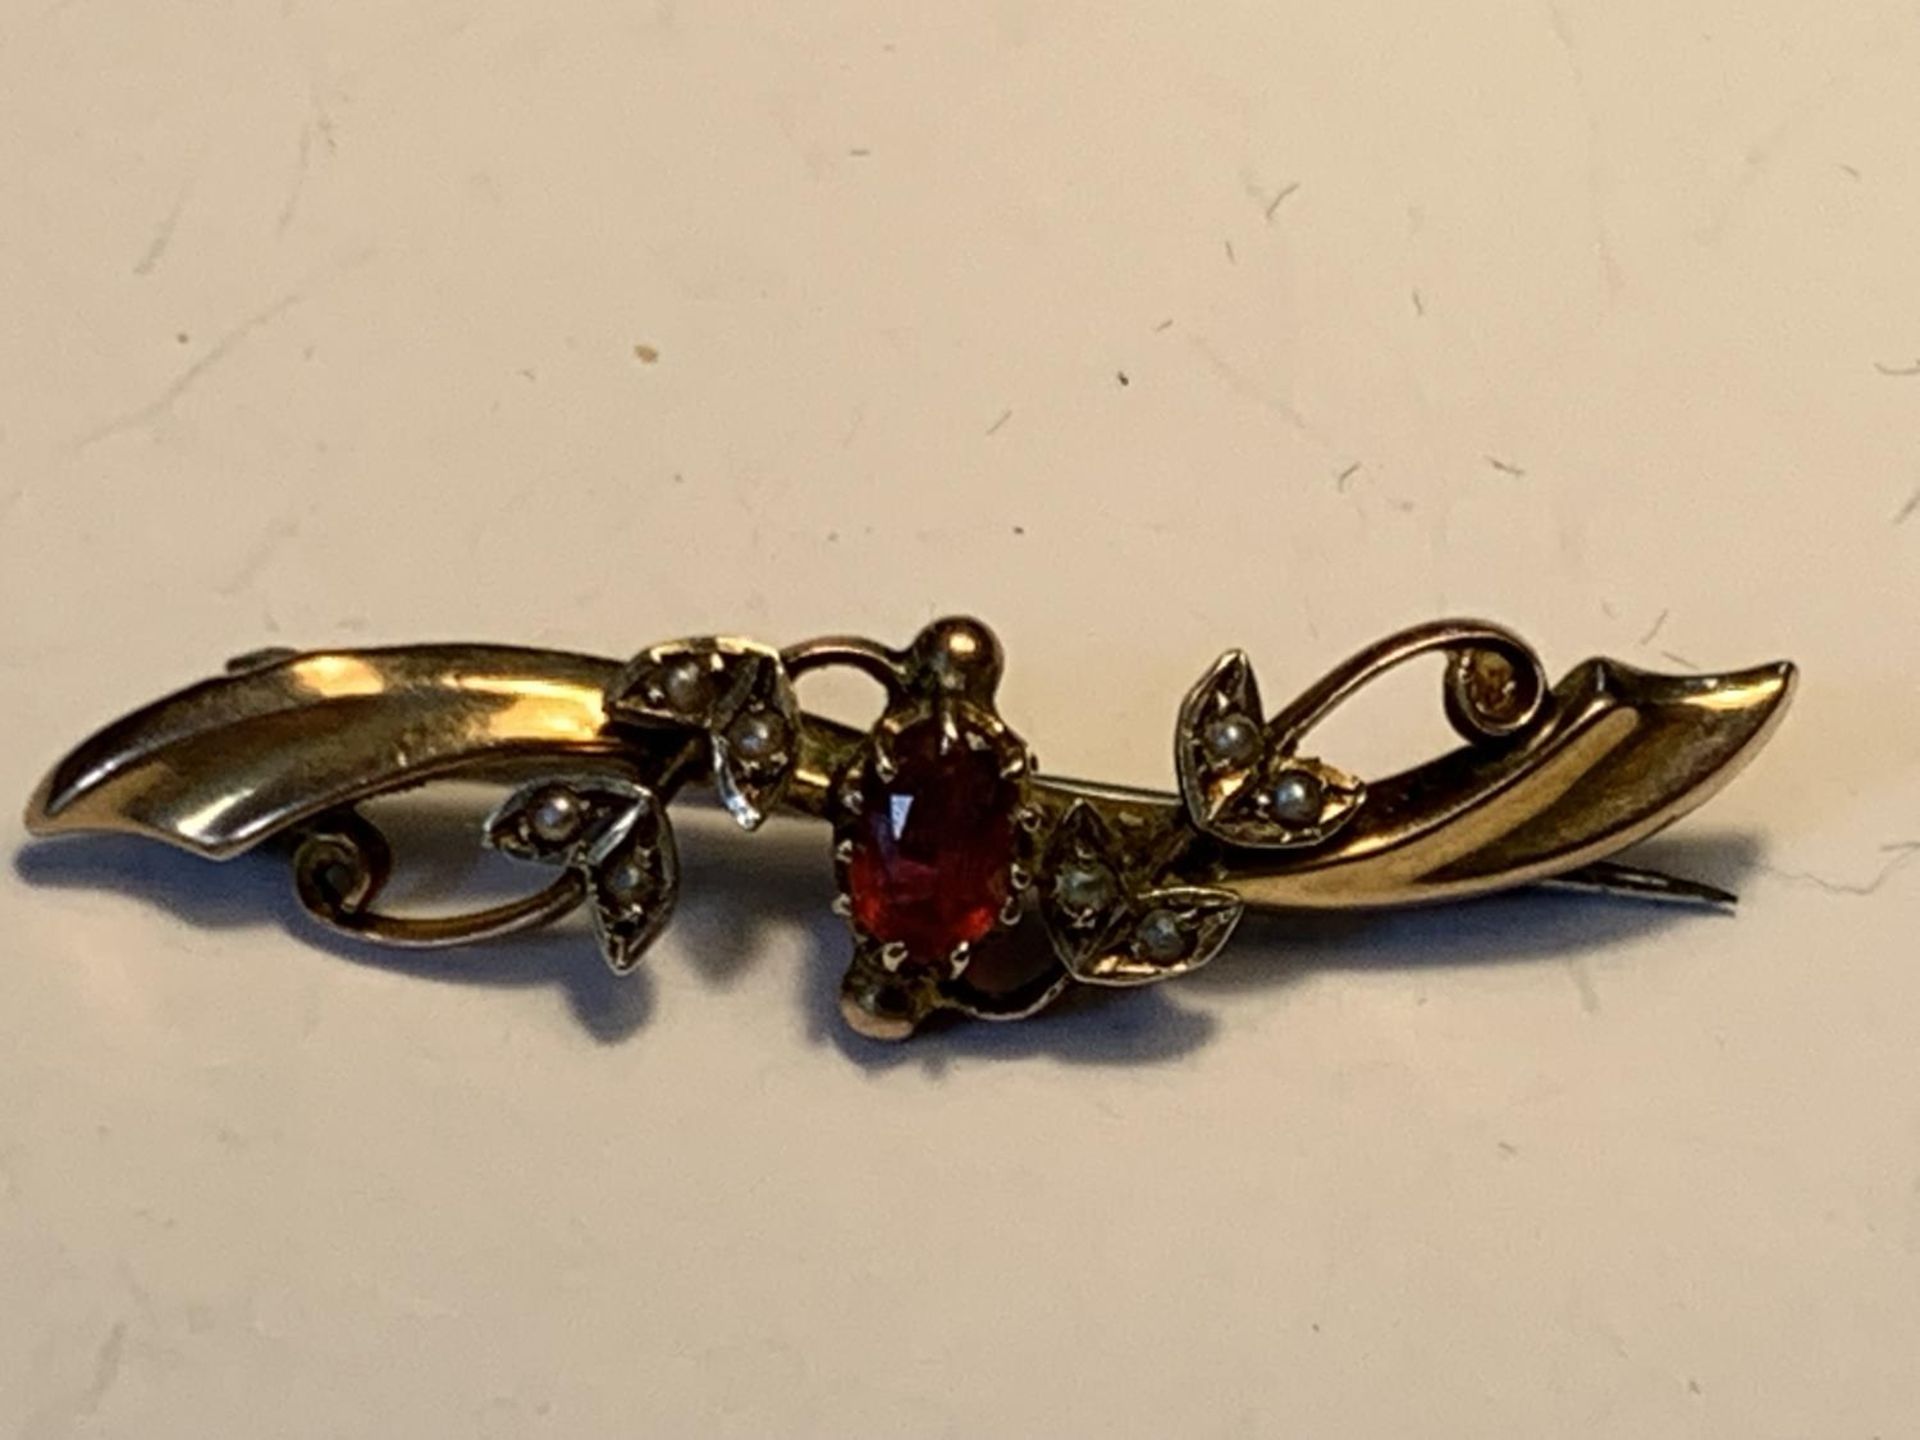 TWO 9 CARAT GOLD BROOCHES ONE WITH A RED STONE AND SEED PEARLS GROSS WEIGHT 5.05 GRAMS - Image 2 of 3